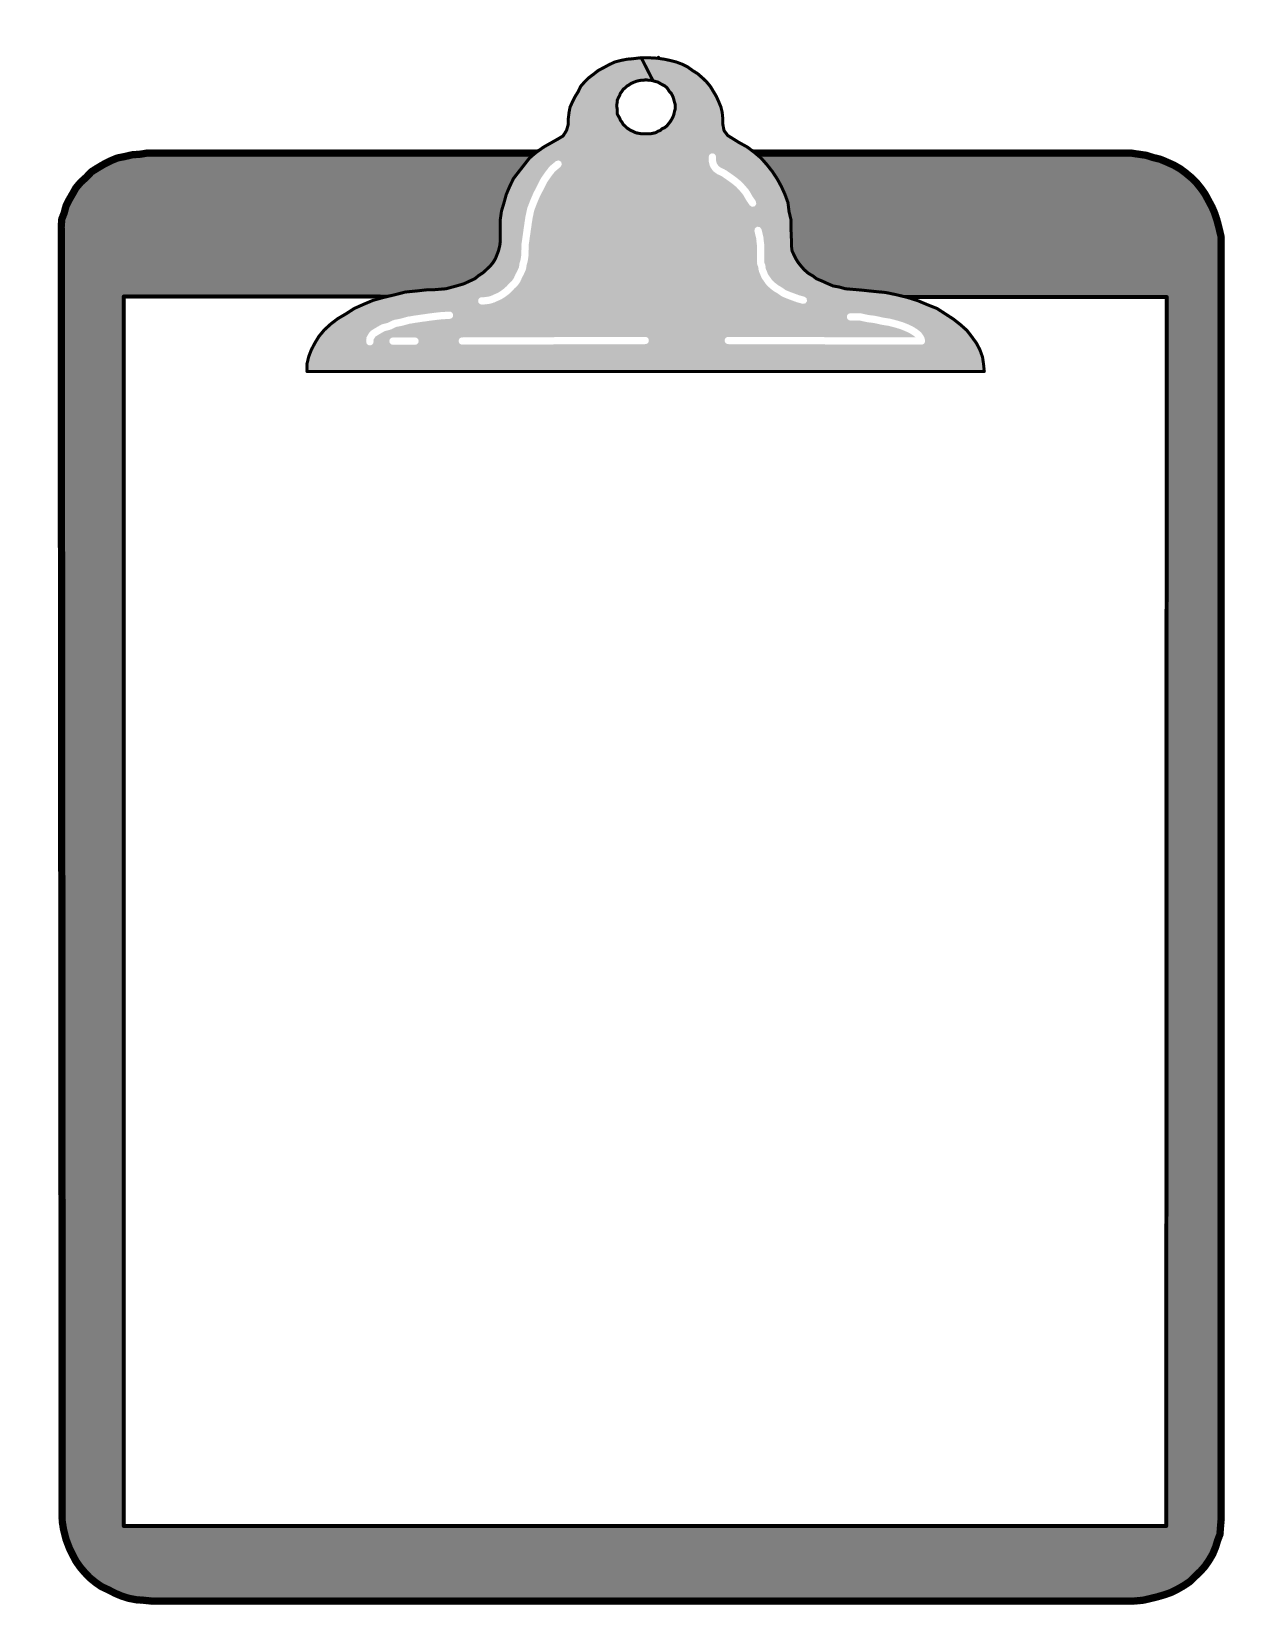 Clipboard clip art cliparts and others inspiration 